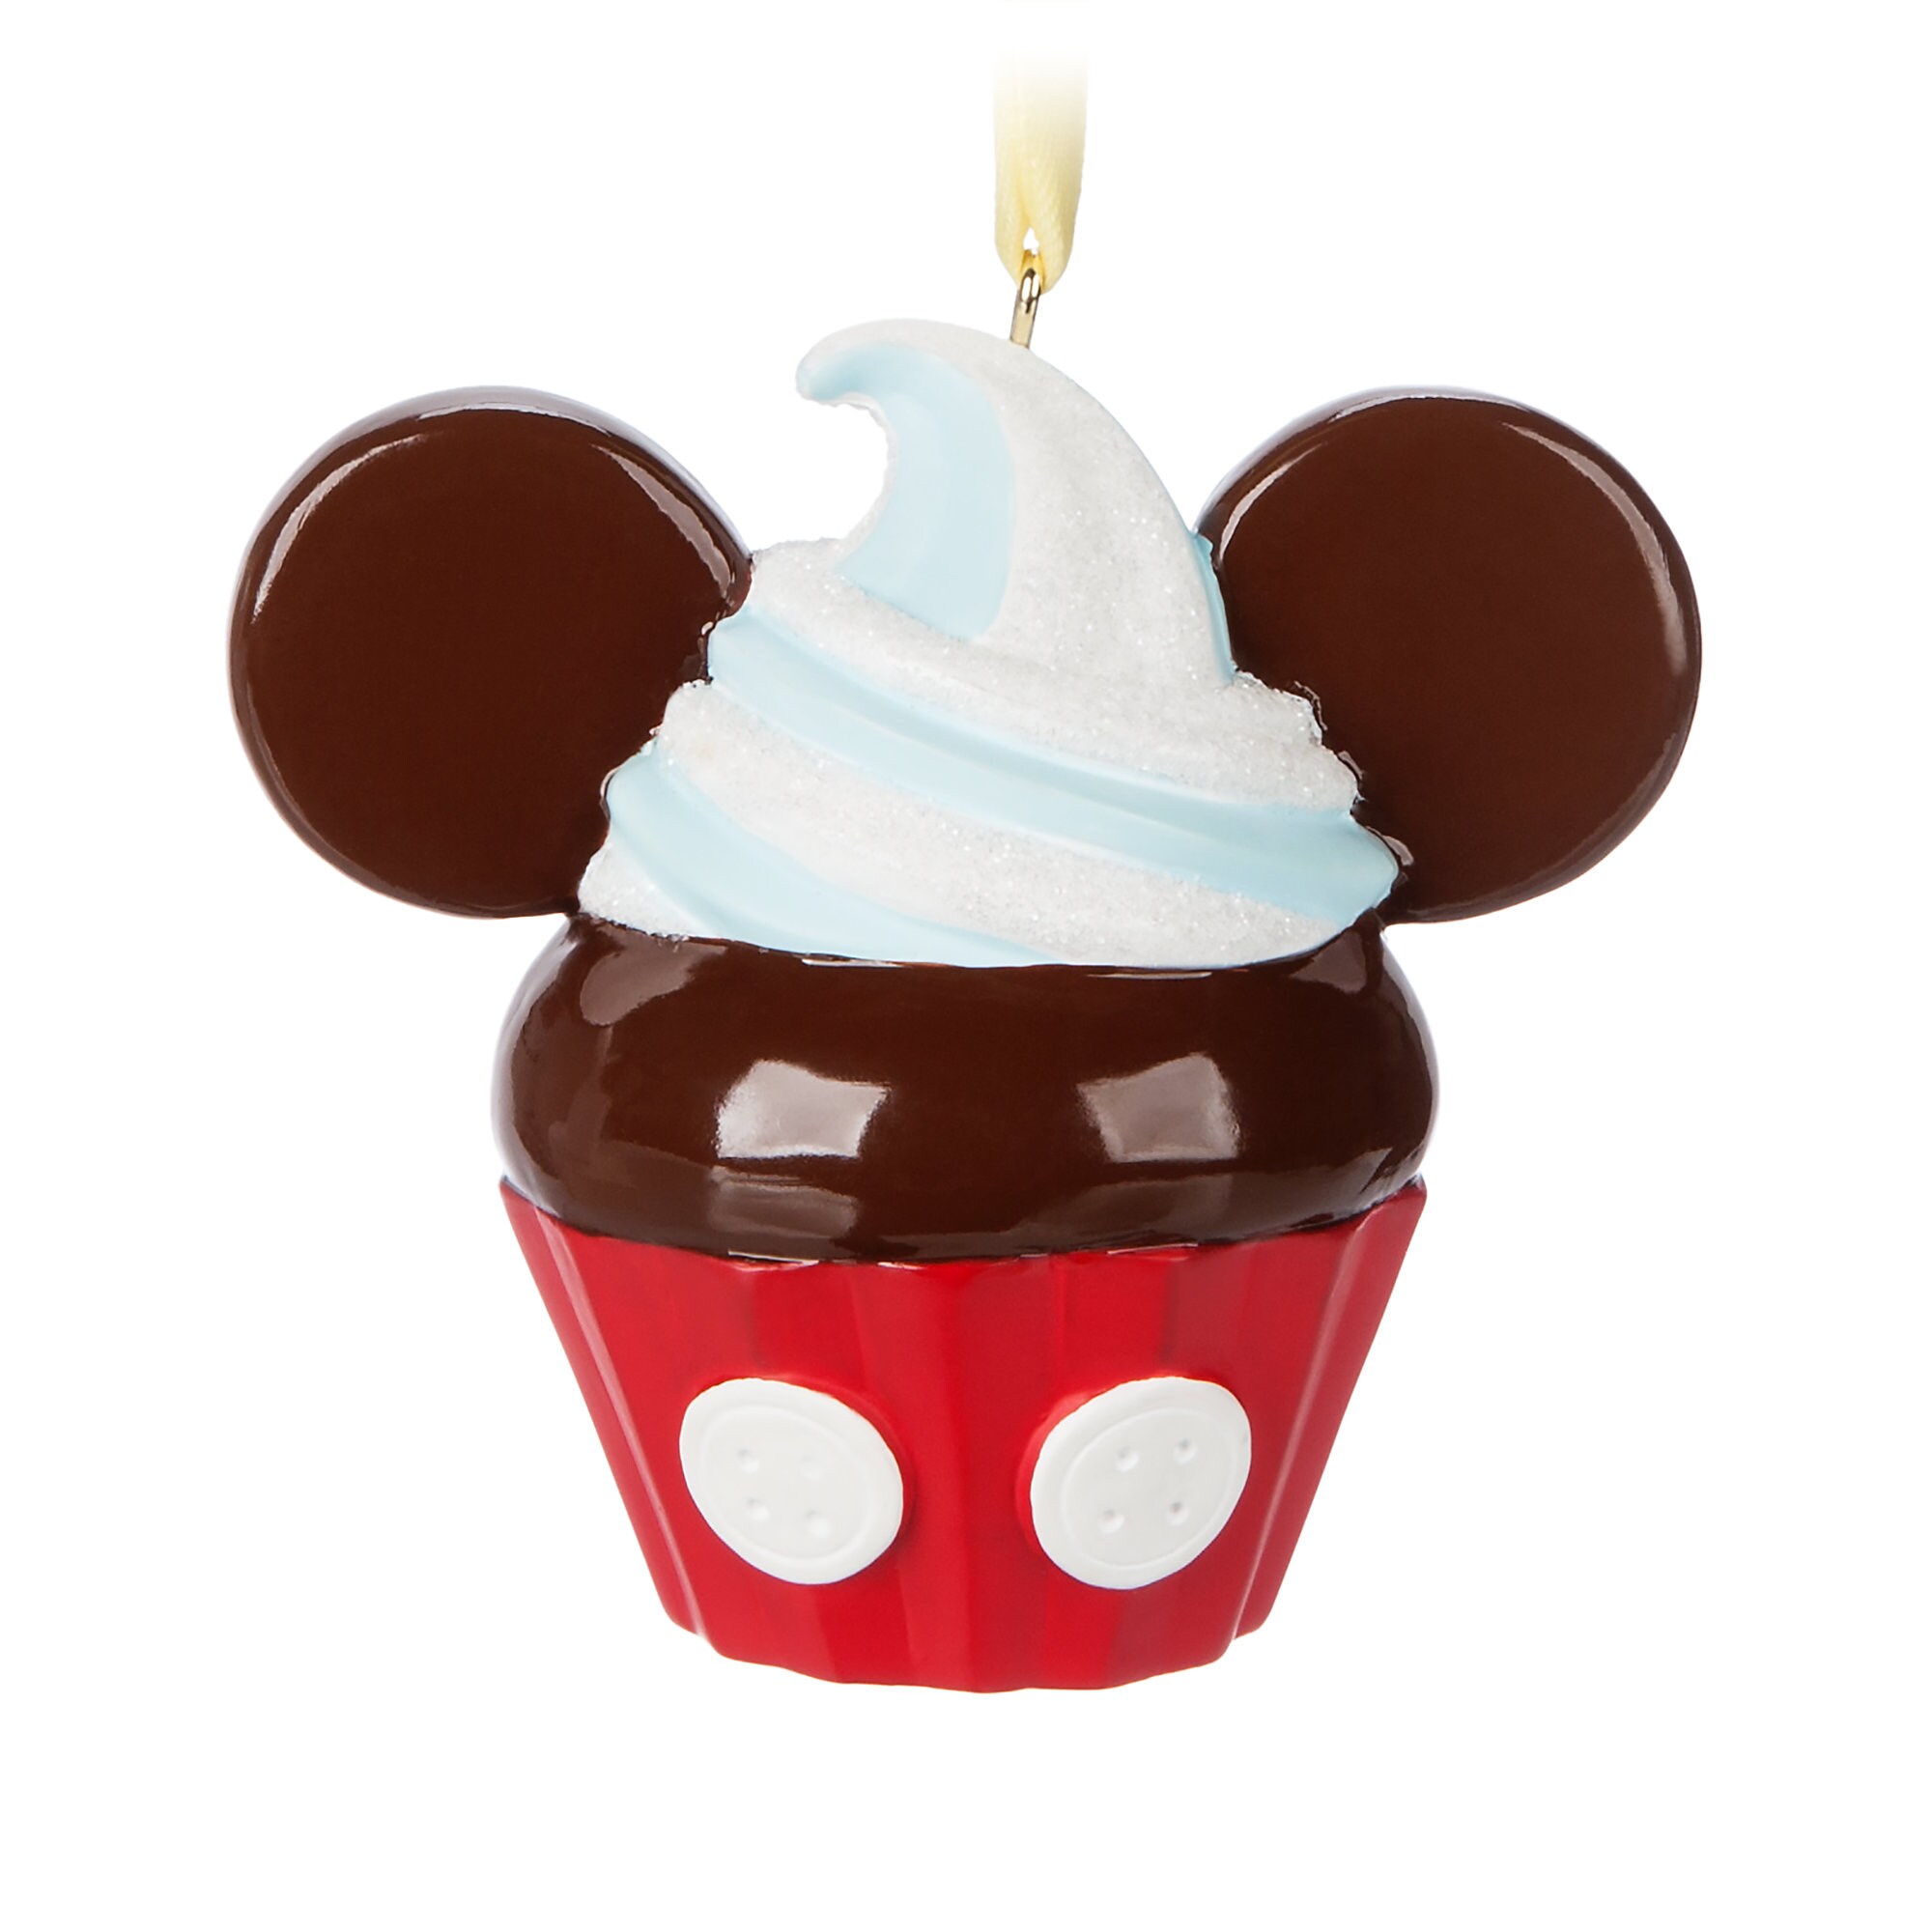 mickey-mouse-cupcake-ornament-now-out-for-purchase-dis-merchandise-news